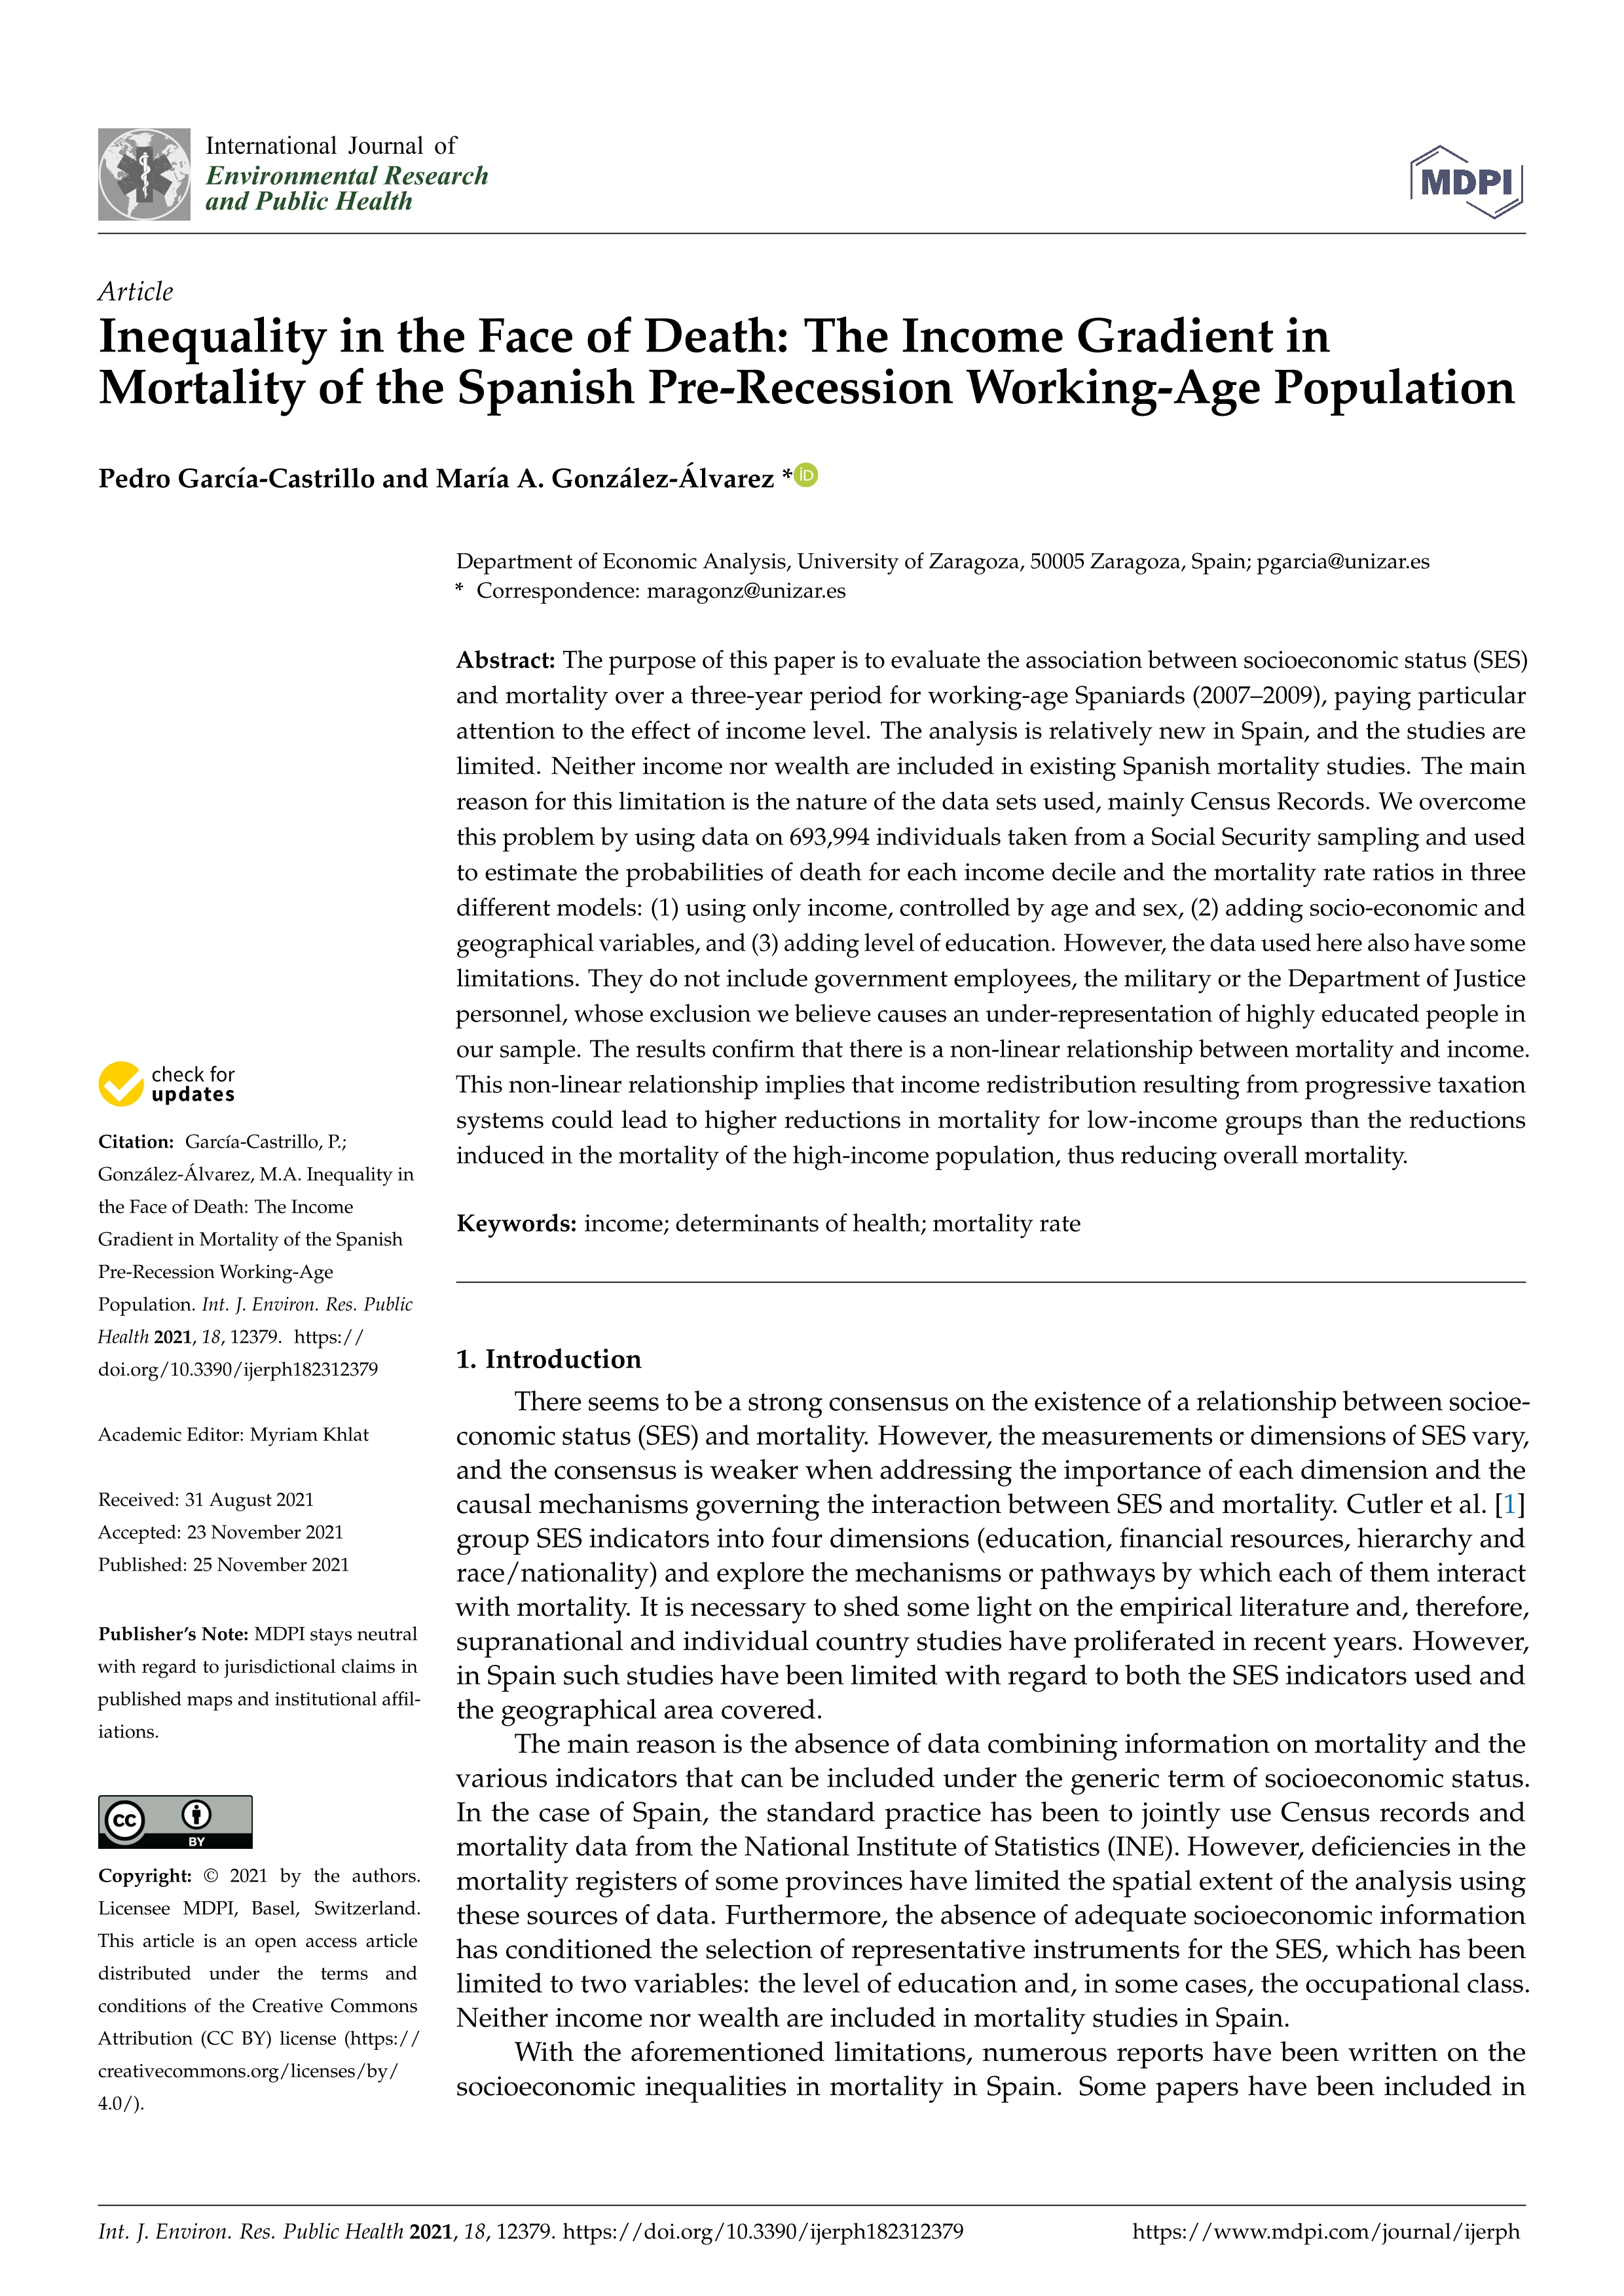 Inequality in the face of death: The income gradient in mortality of the spanish pre-recession working-age population